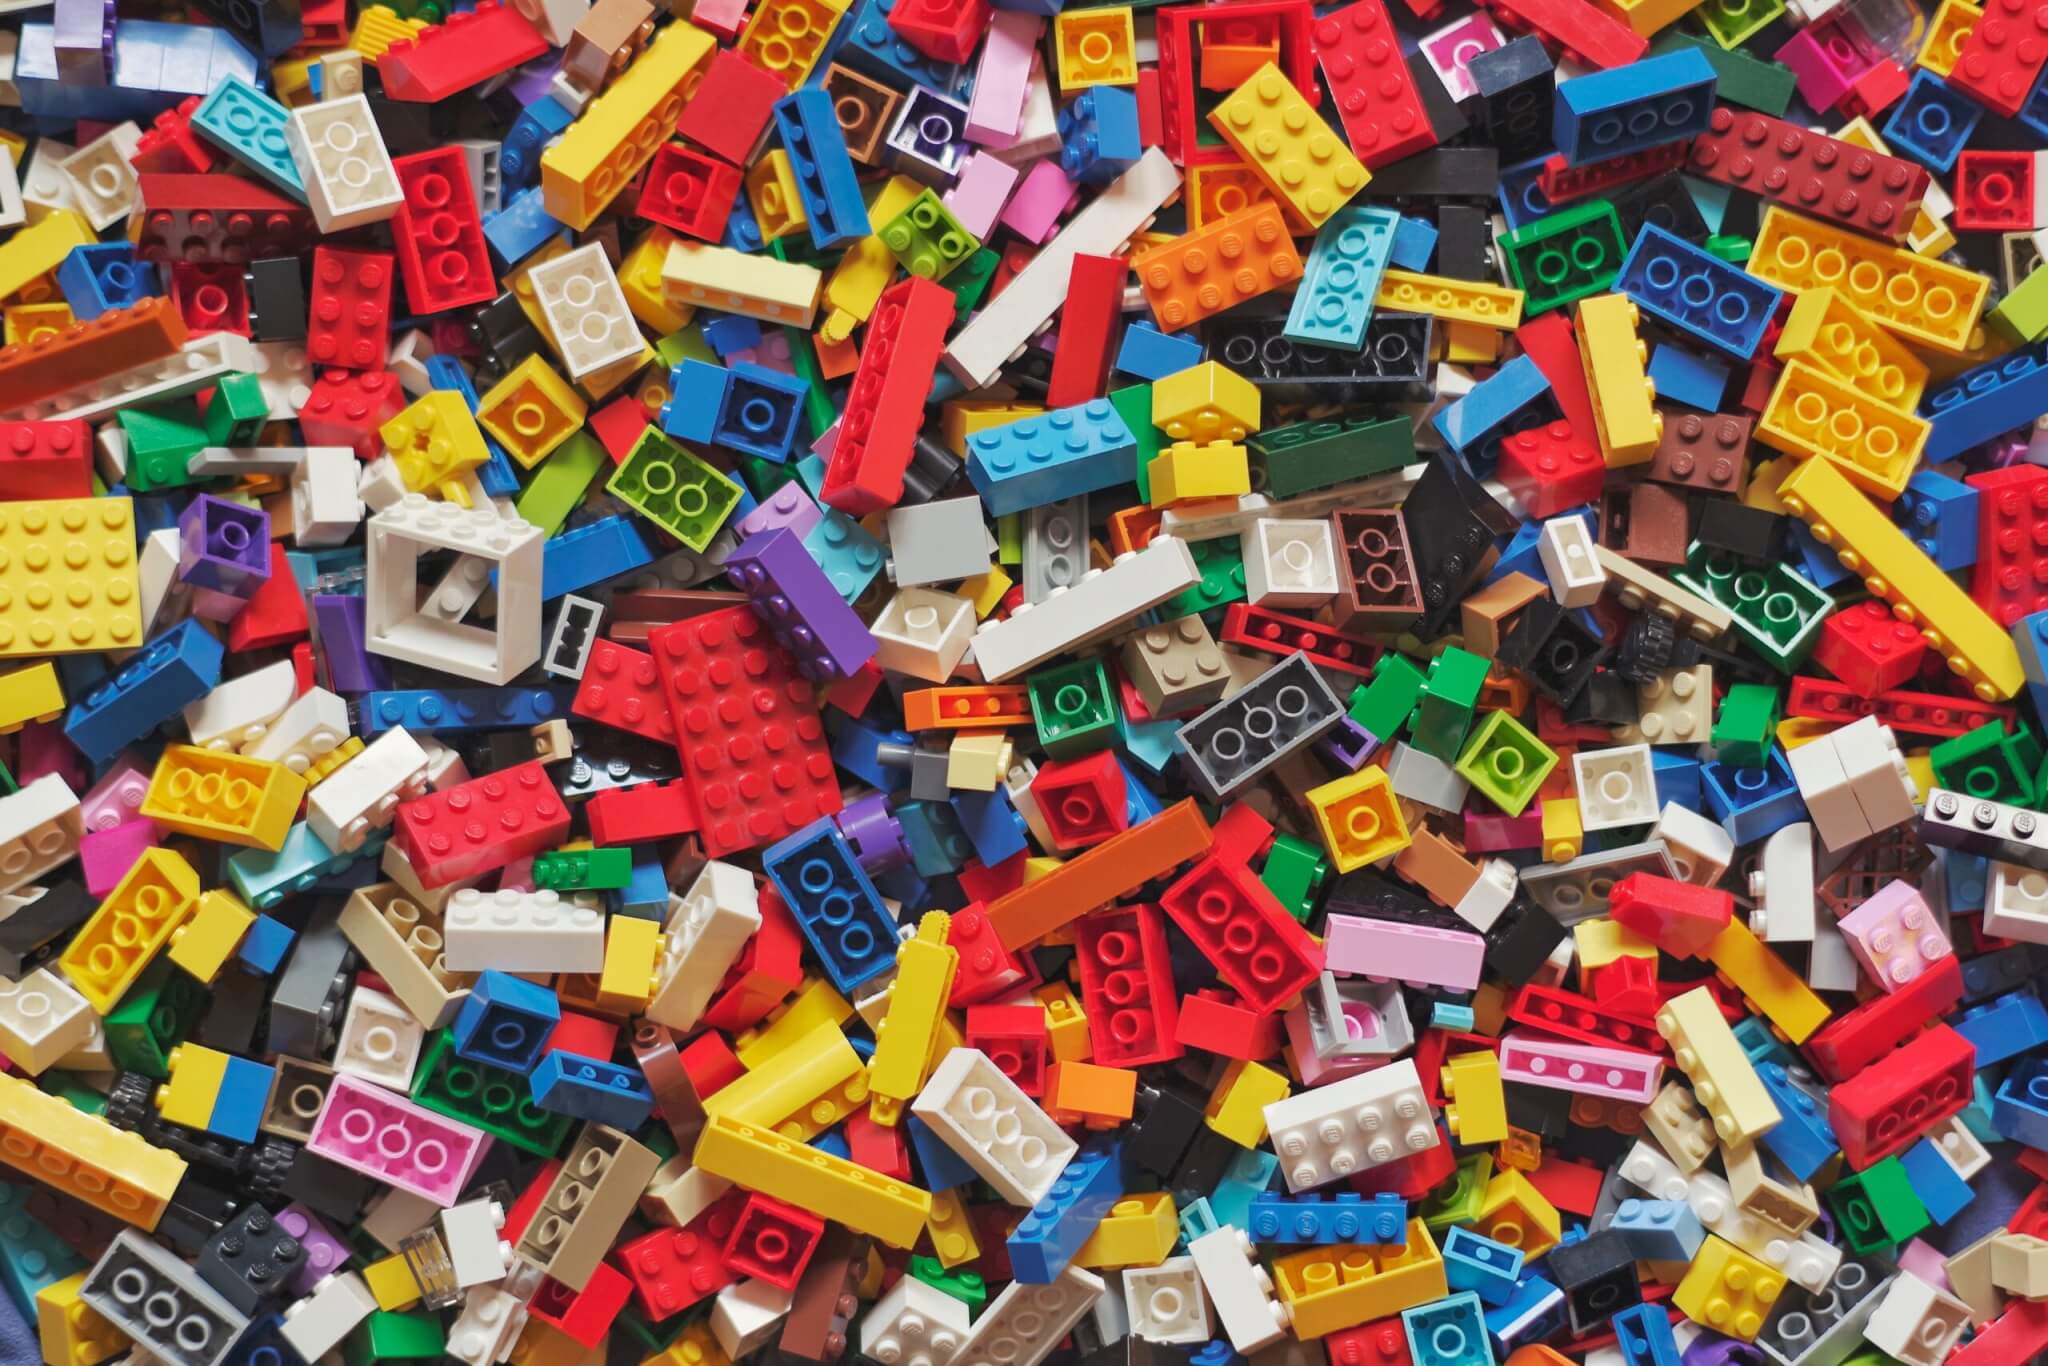 LEGO of all shapes and sizes and colors in a pile (Photo by Xavi Cabrera on Unsplash)